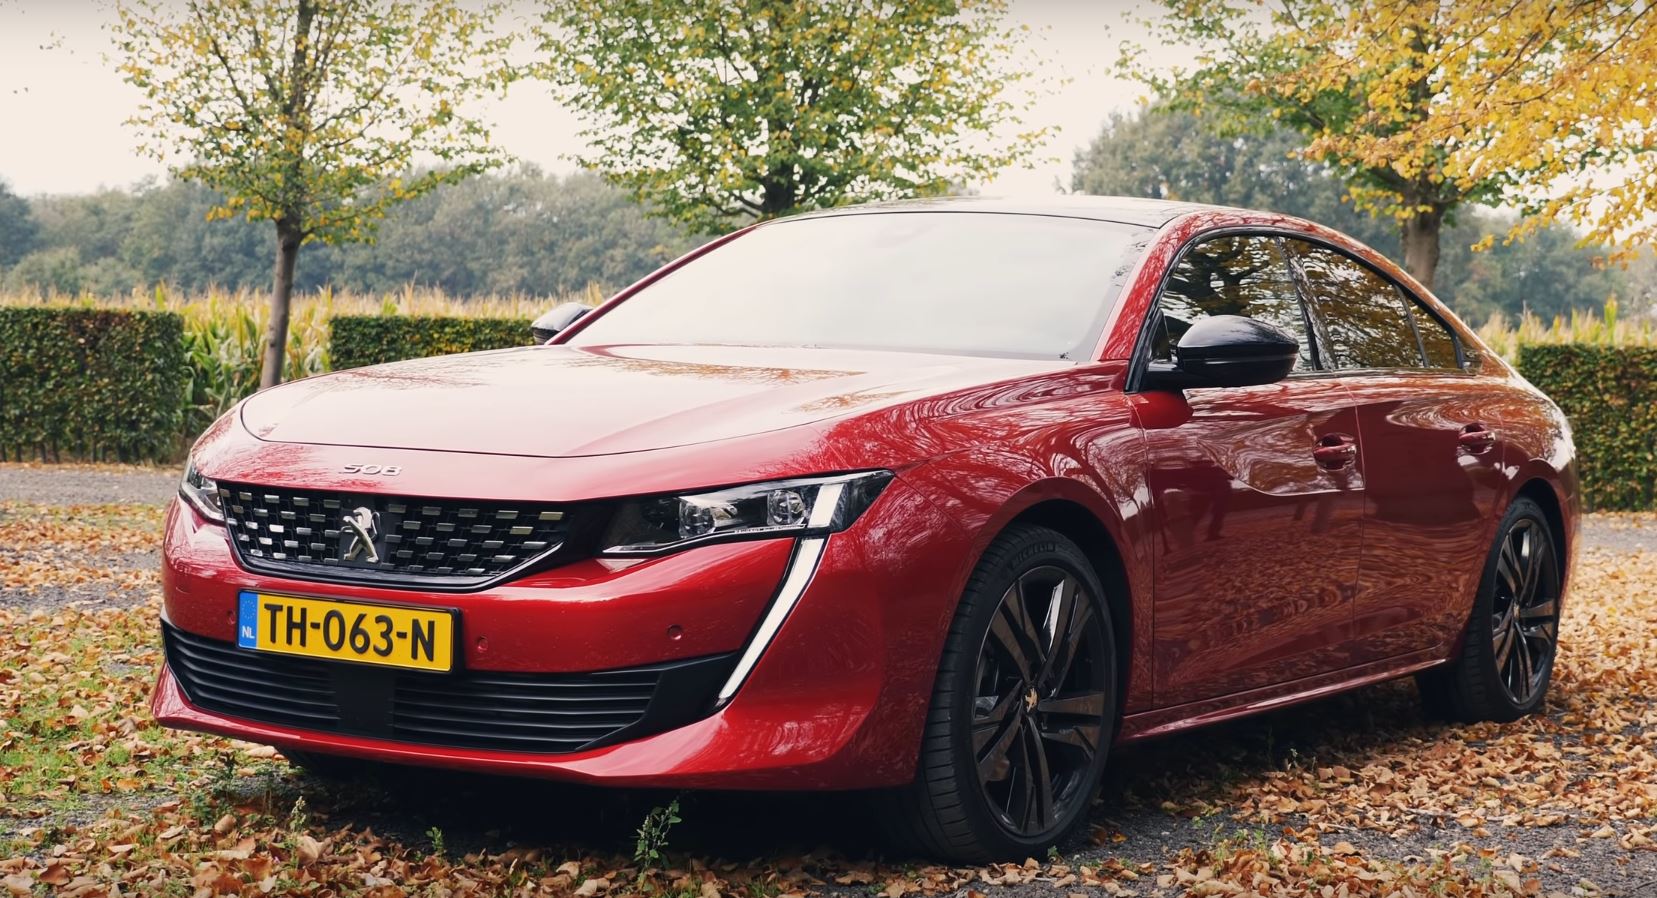 2019 peugeot 508 gt is slower than a 225 hp car should be but still sexy 129524 1 - پژو 508 GT لاین 2020 خودرویی فوق العاده از کمپانی پژو